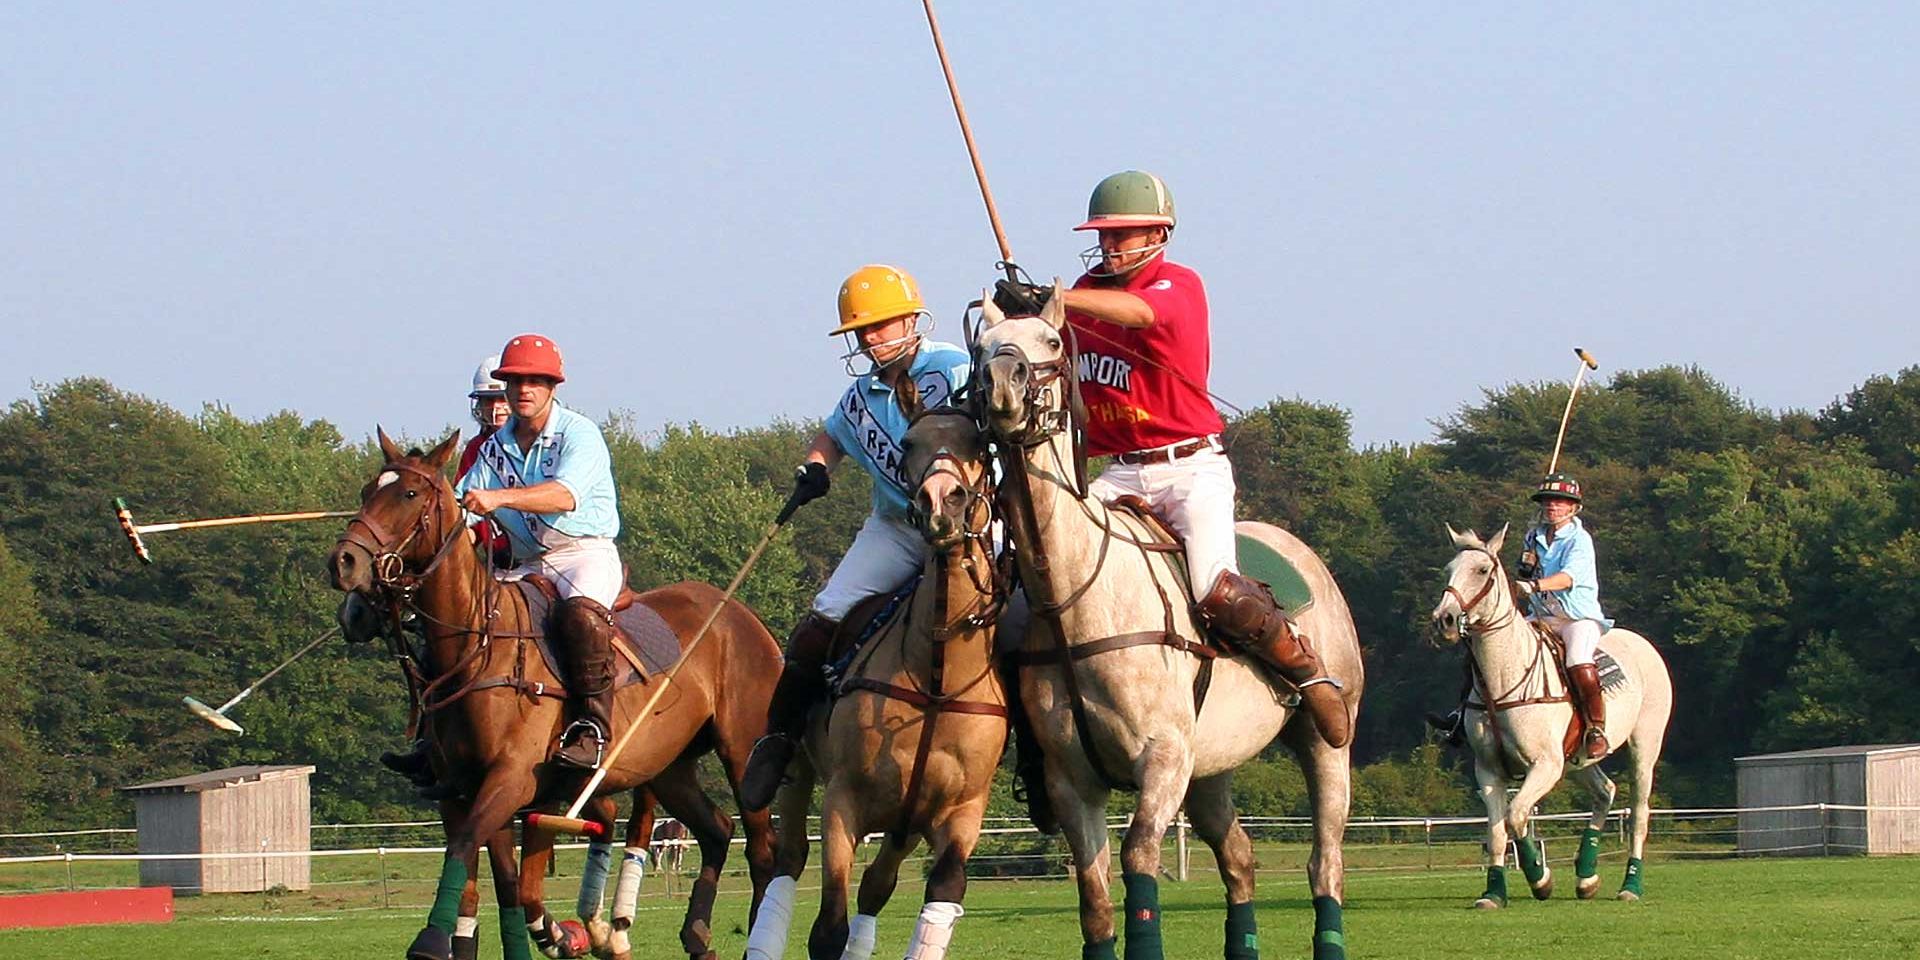 Newport Polo is a classic American sport that invites teams from all around the world and major US cities, keeping this thriving international pastime alive. Not only do the polo grounds have live viewings of the games, but they host culinary events like 